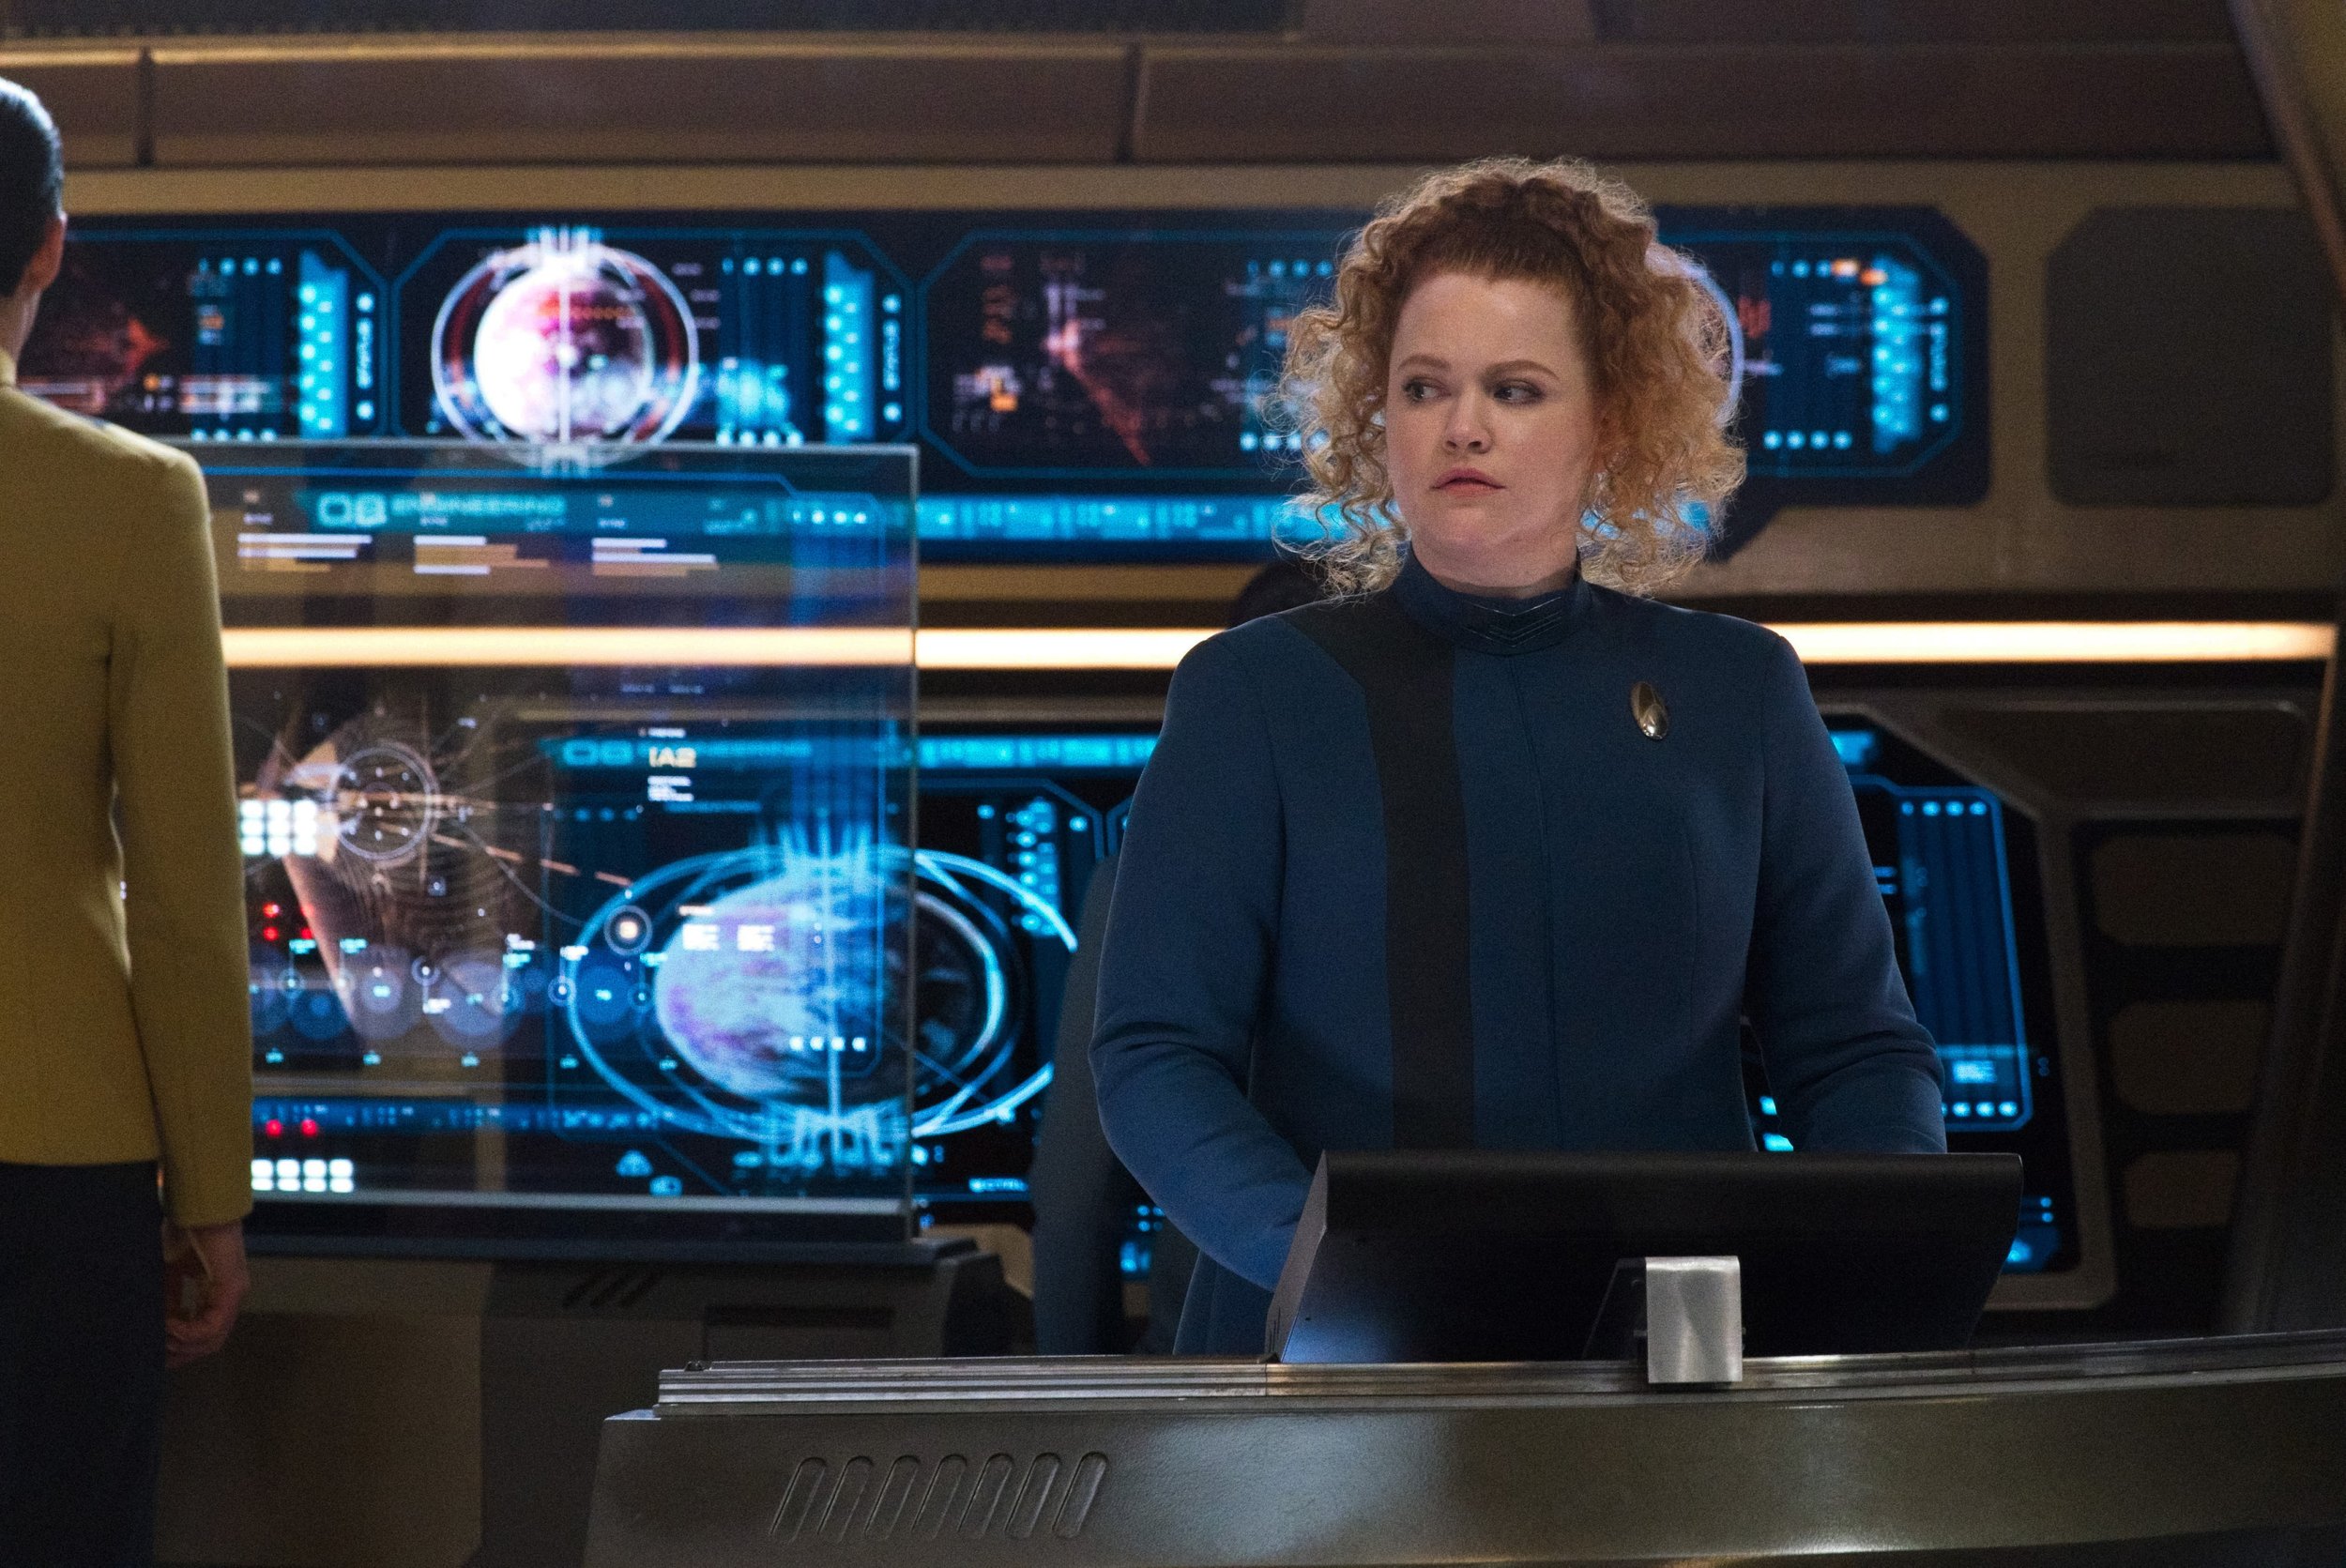   Pictured: Mary Wiseman as Tilly of the Paramount+ original series STAR TREK: DISCOVERY. Photo Cr: Michael Gibson/ViacomCBS © 2021 ViacomCBS. All Rights Reserved.  